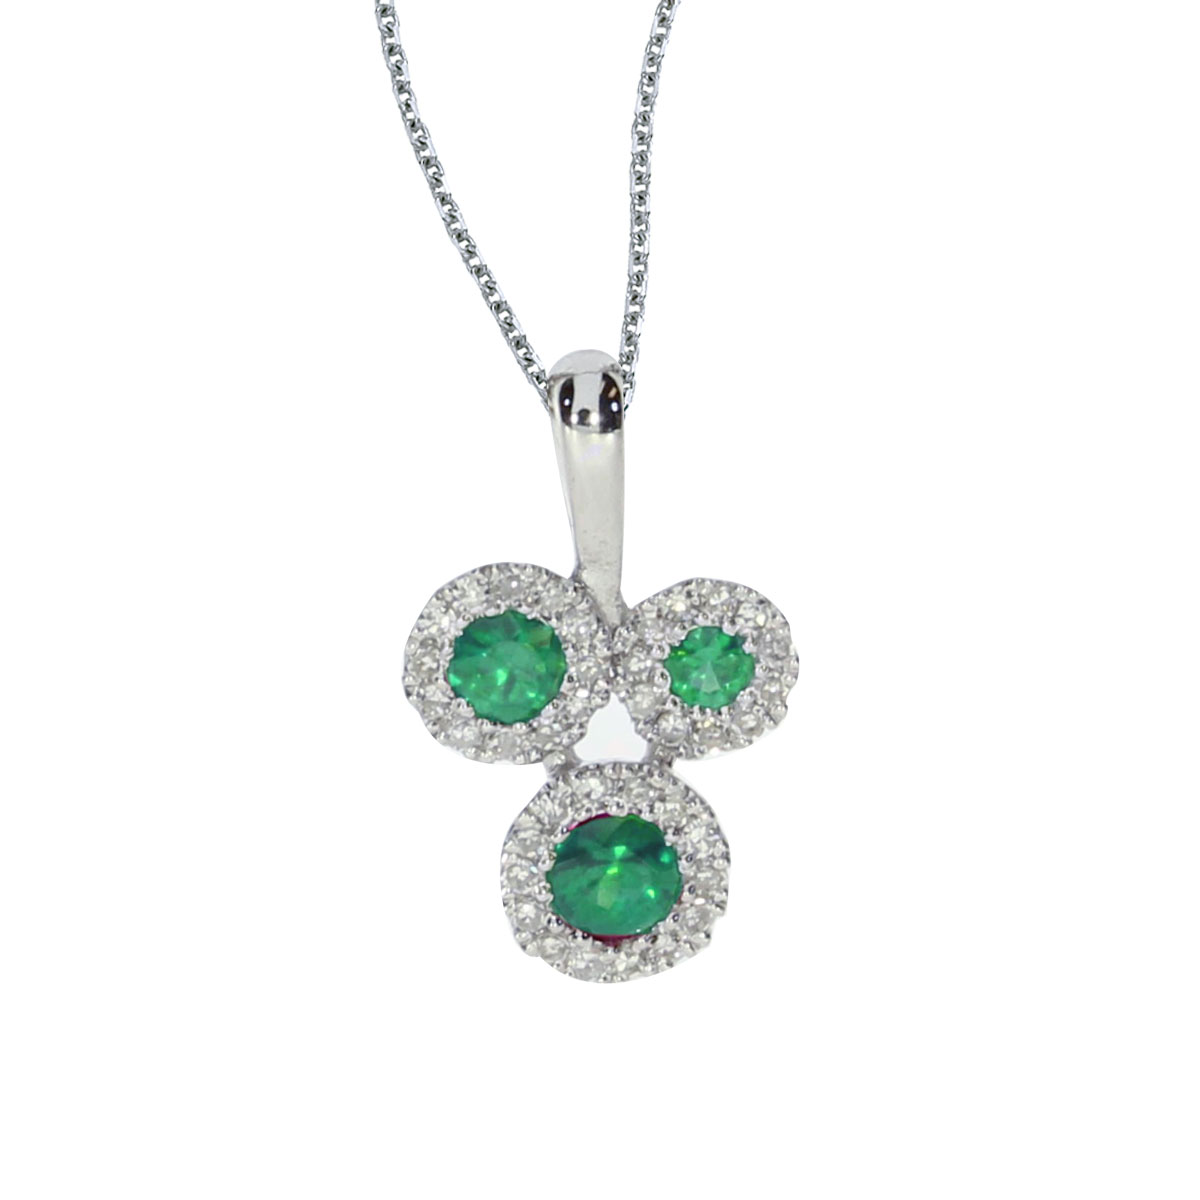 This 14k white gold pendant contains three 2.8 mm emeralds surrounded by .07 carats of shimmering...